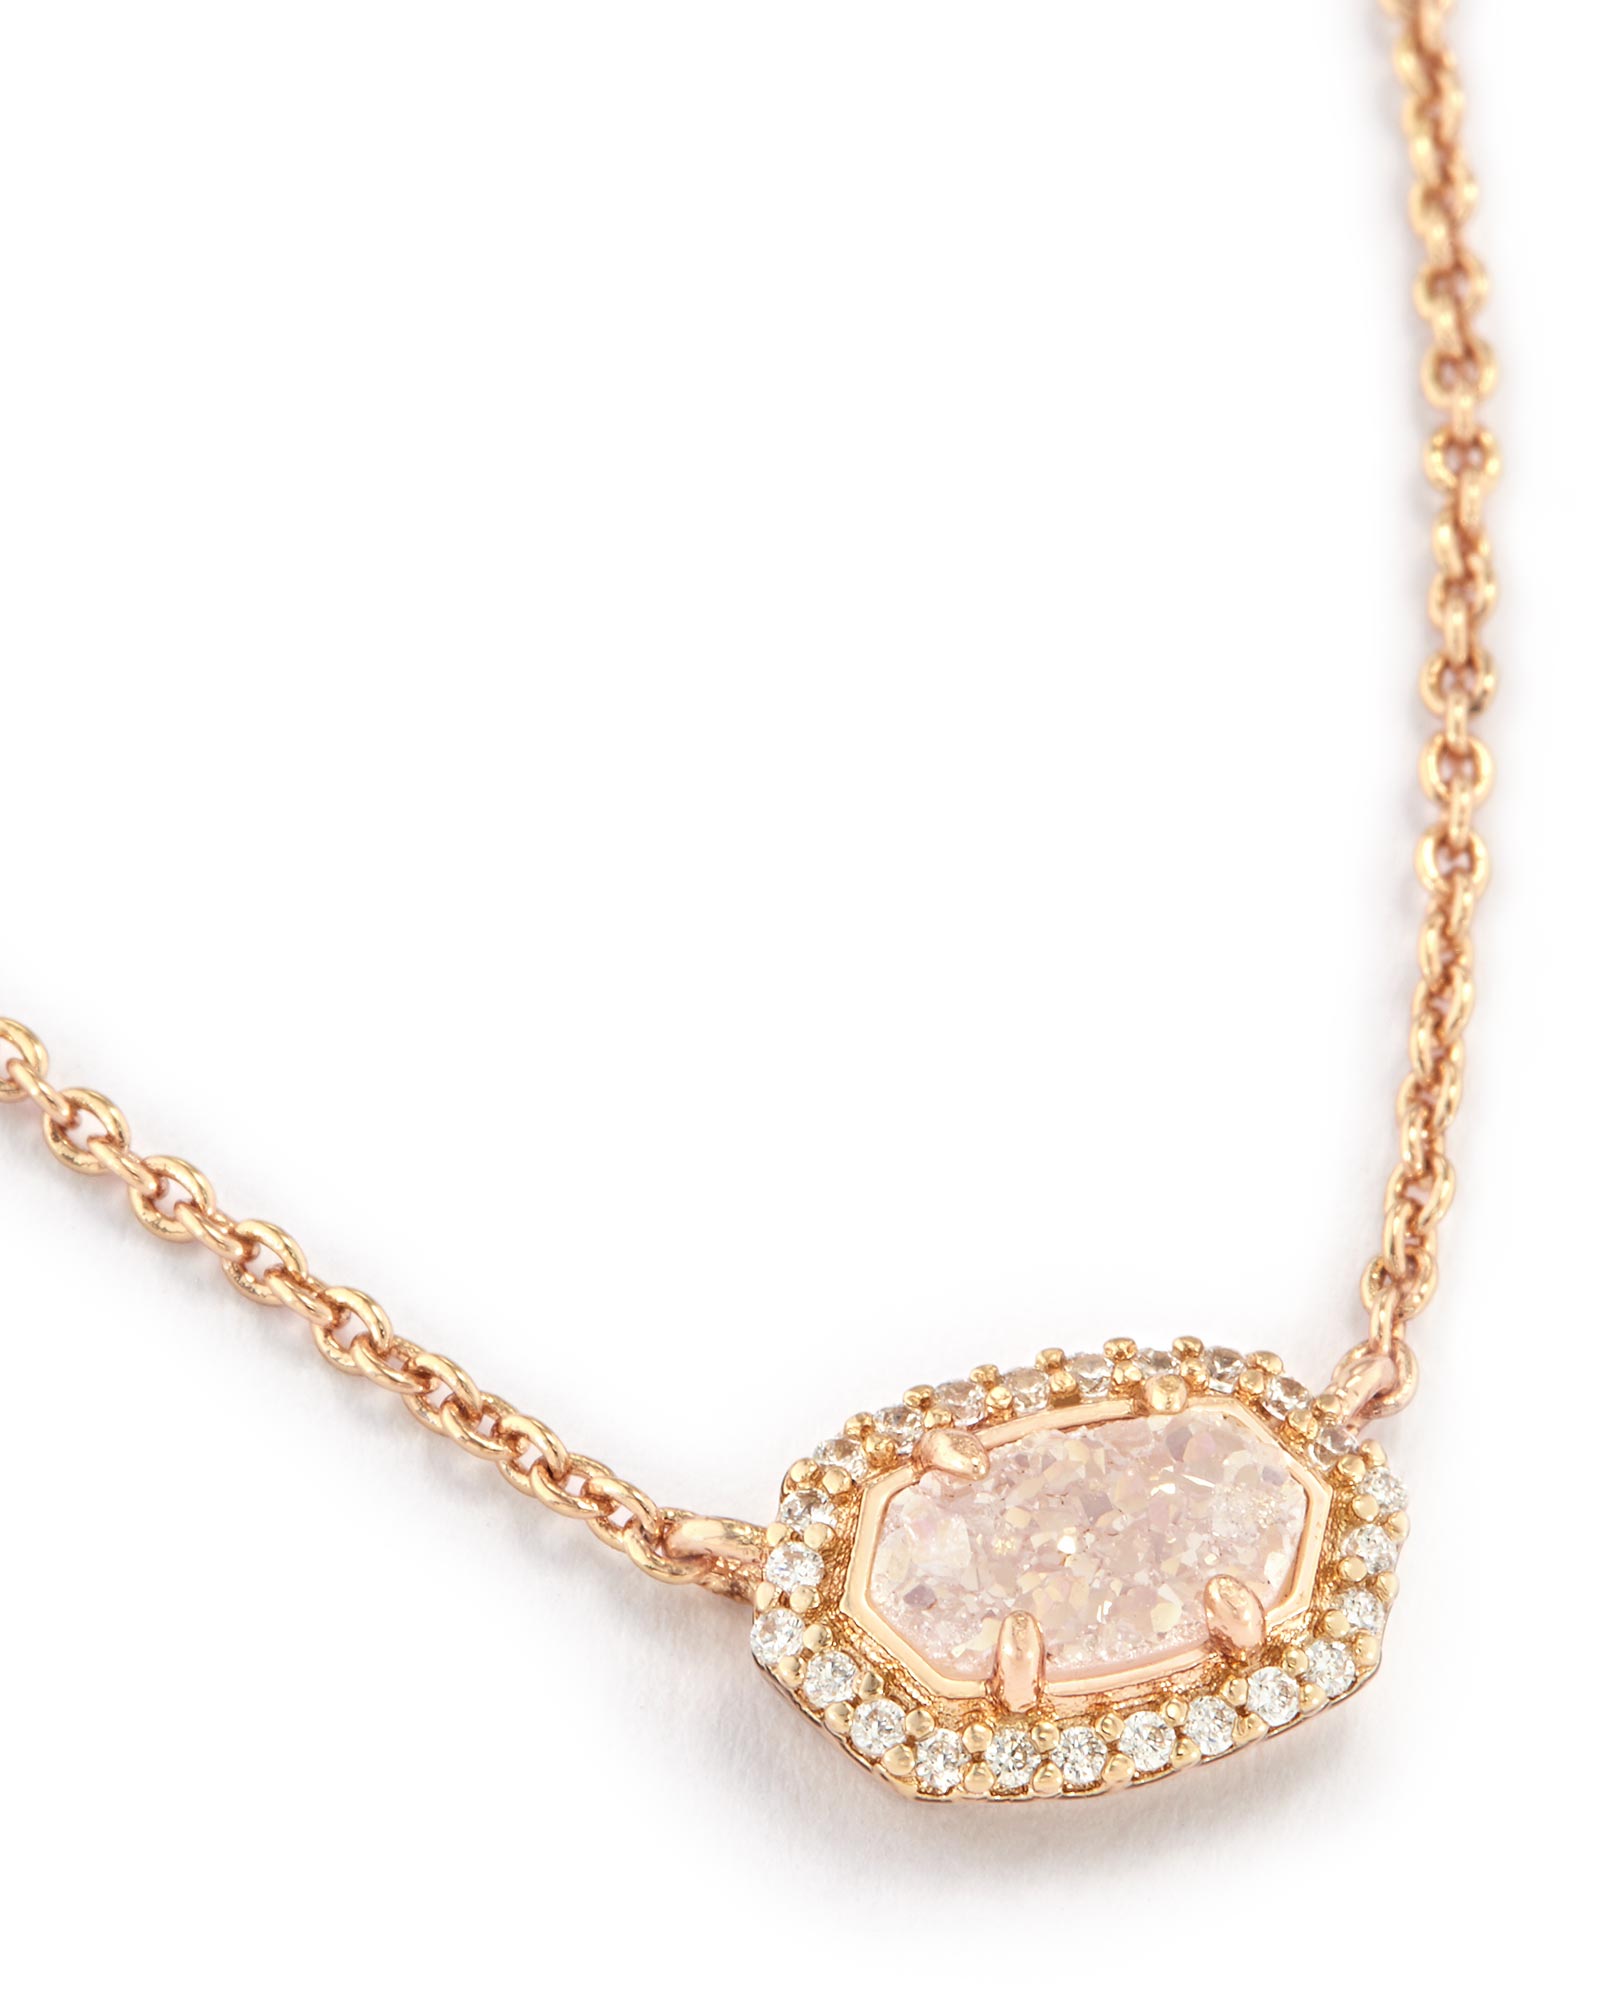 Chelsea Rose Gold Pendant Necklace in Iridescent Drusy ...